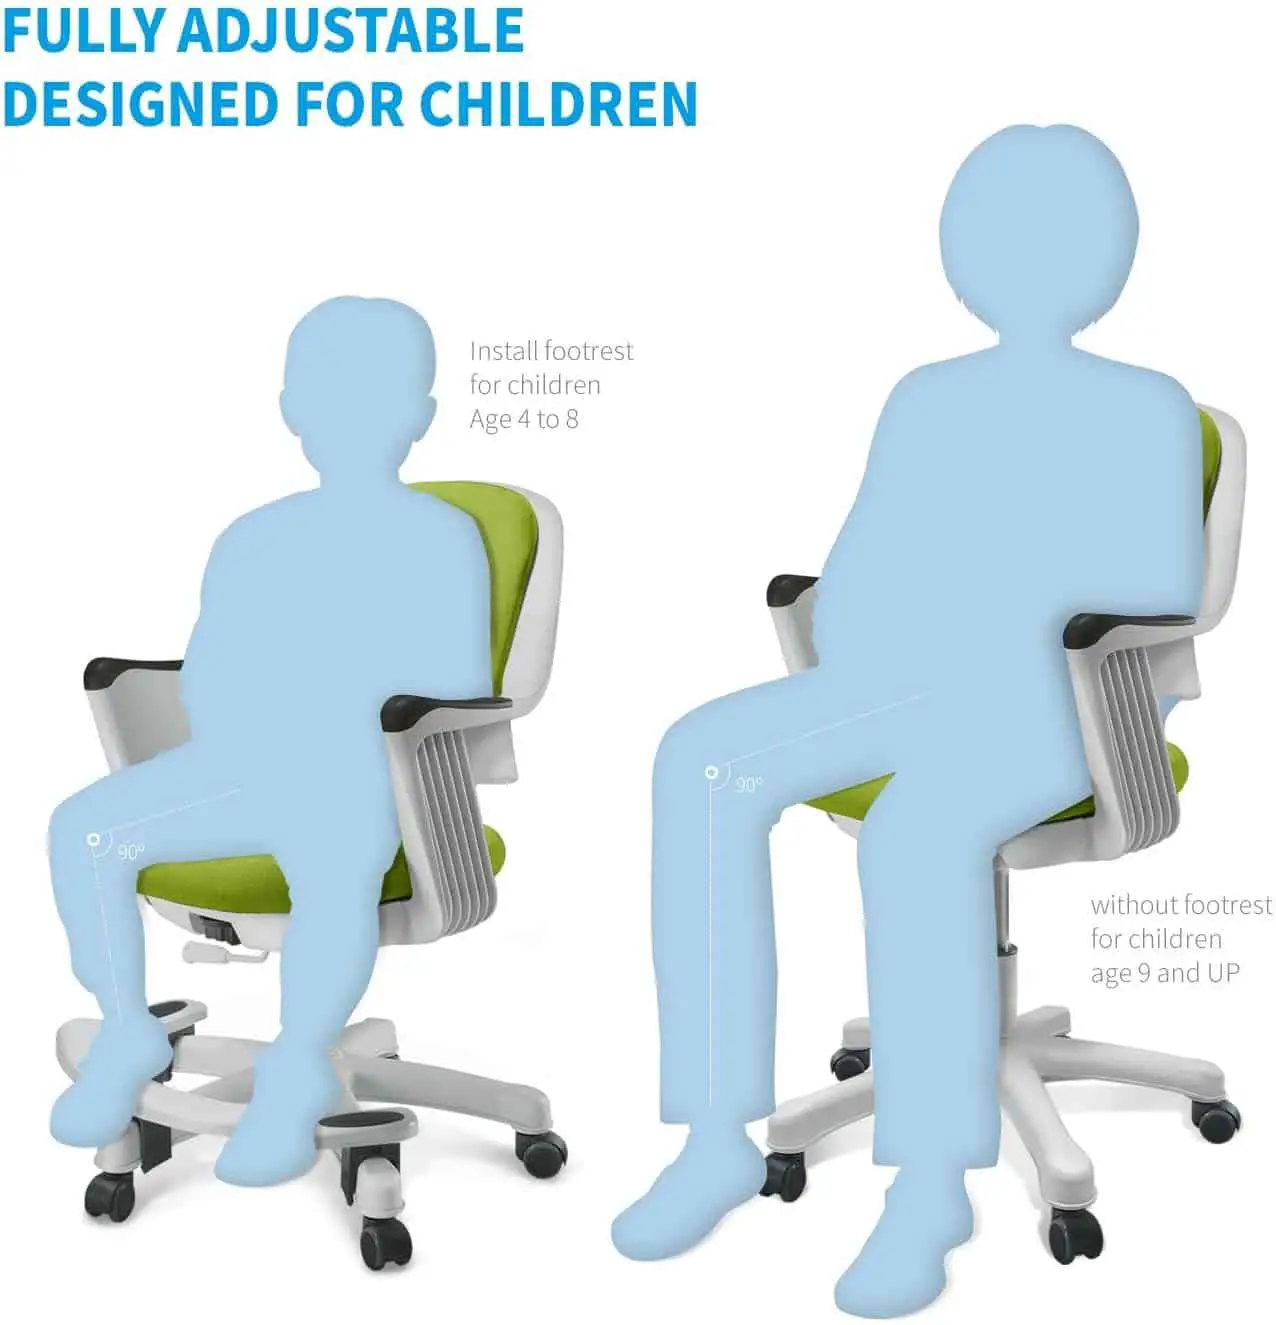 The right size for a kids chair is important